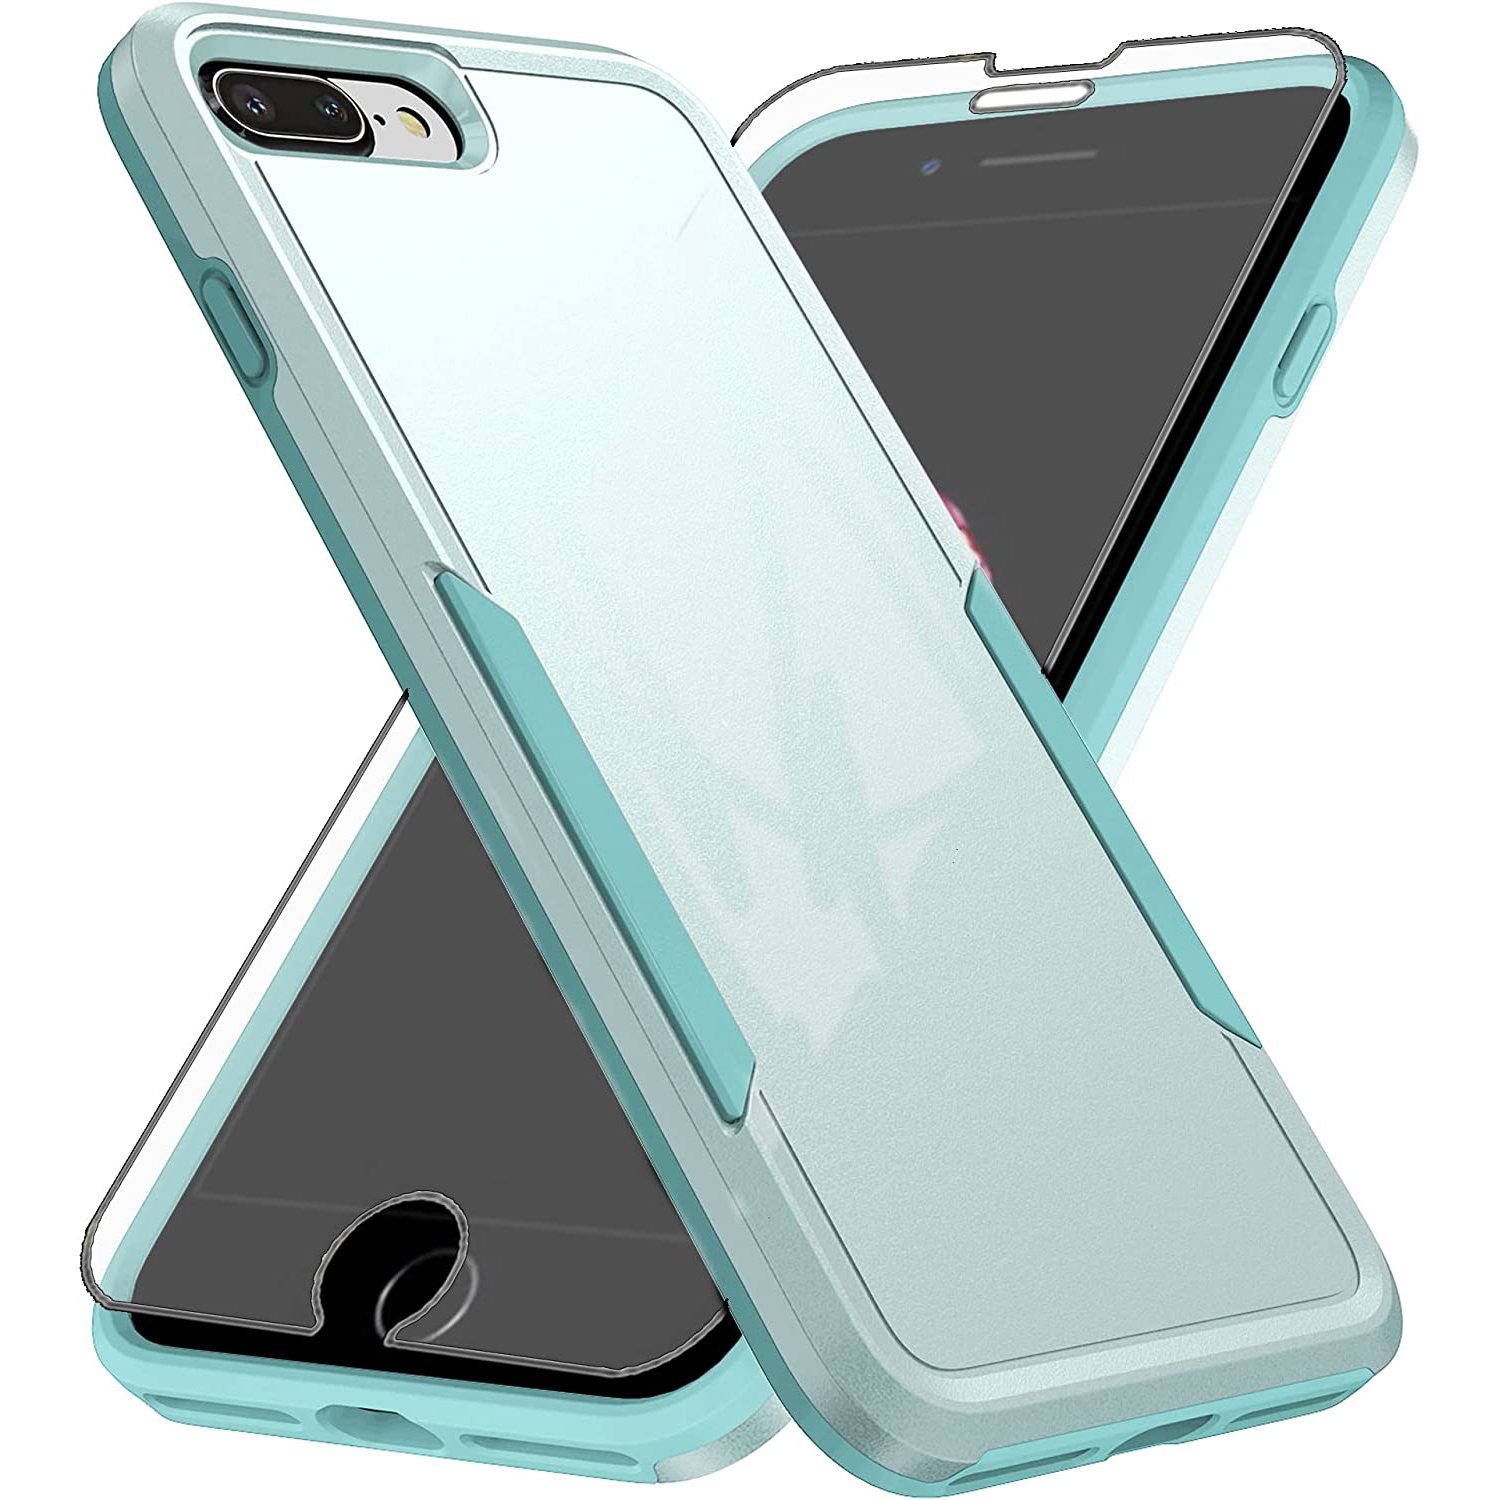 Phone Case for iPhone 6plus 6splus 7plus 8plus i 6/6s/7/8 Plus with Screen Protector Cover and Full Body